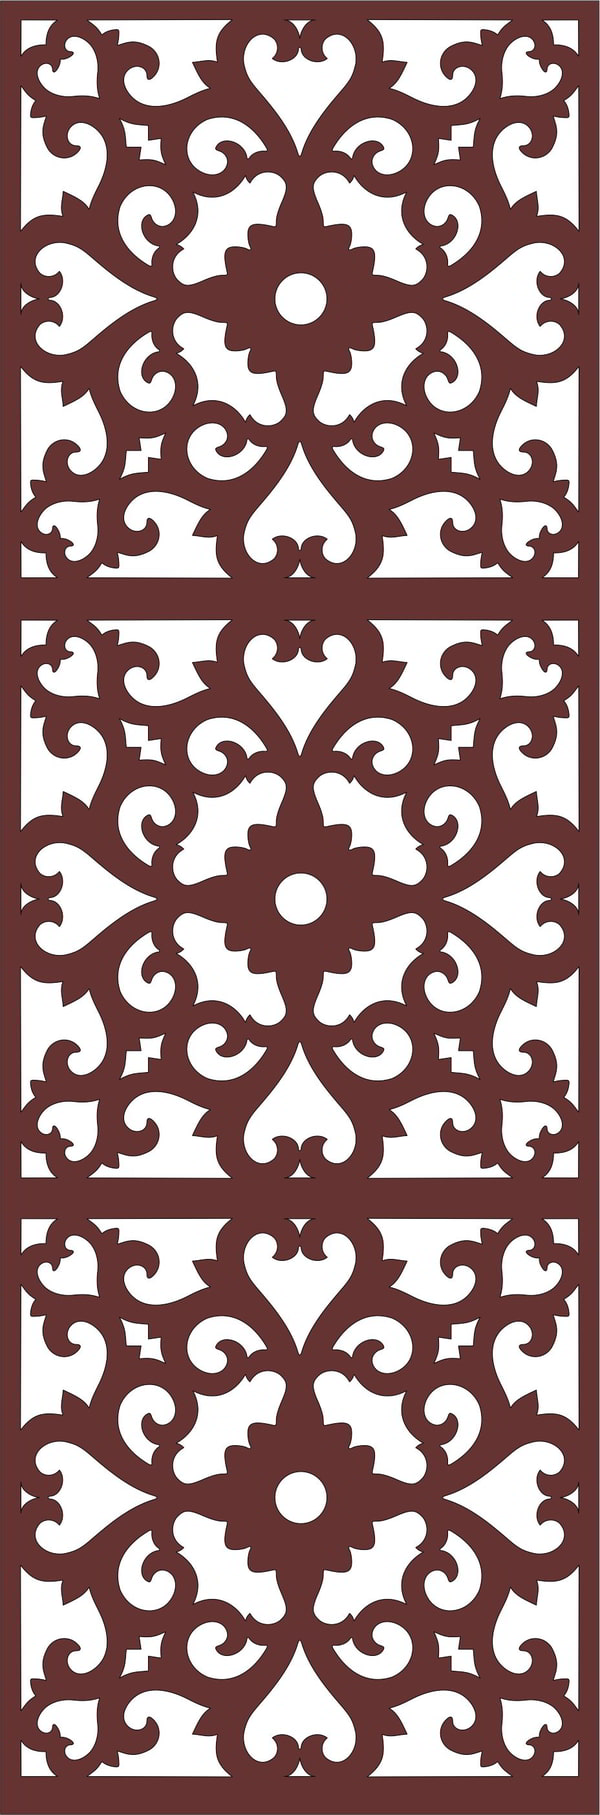 Laser Cut Decor Seamless Separator Floral Grill Panel Download Free Vector